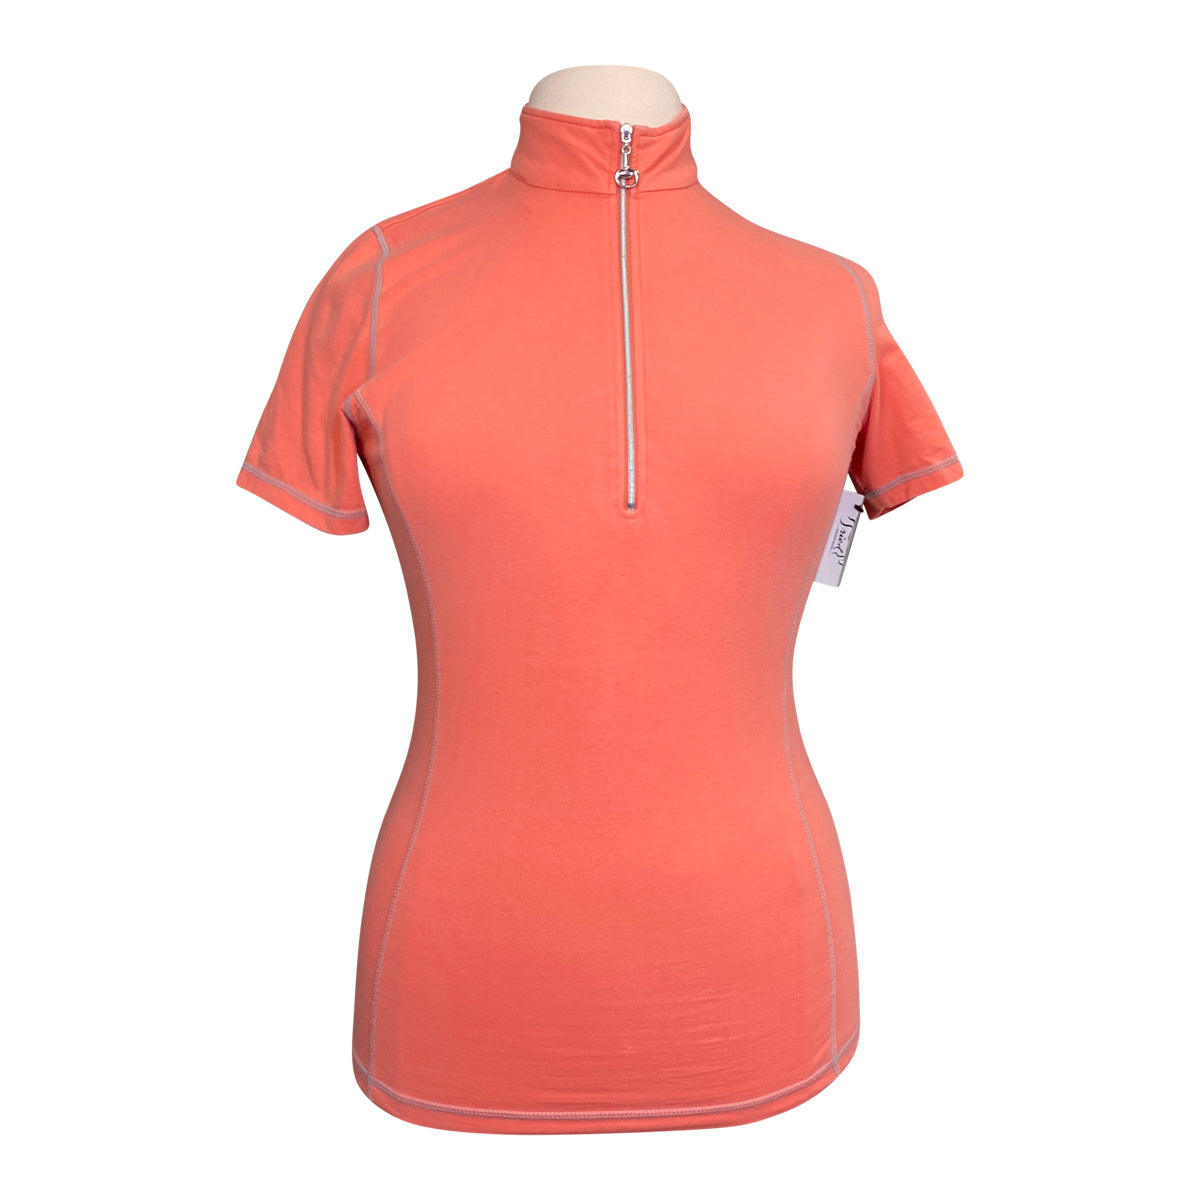 Goode Rider 'Ideal' Shirt in Coral 